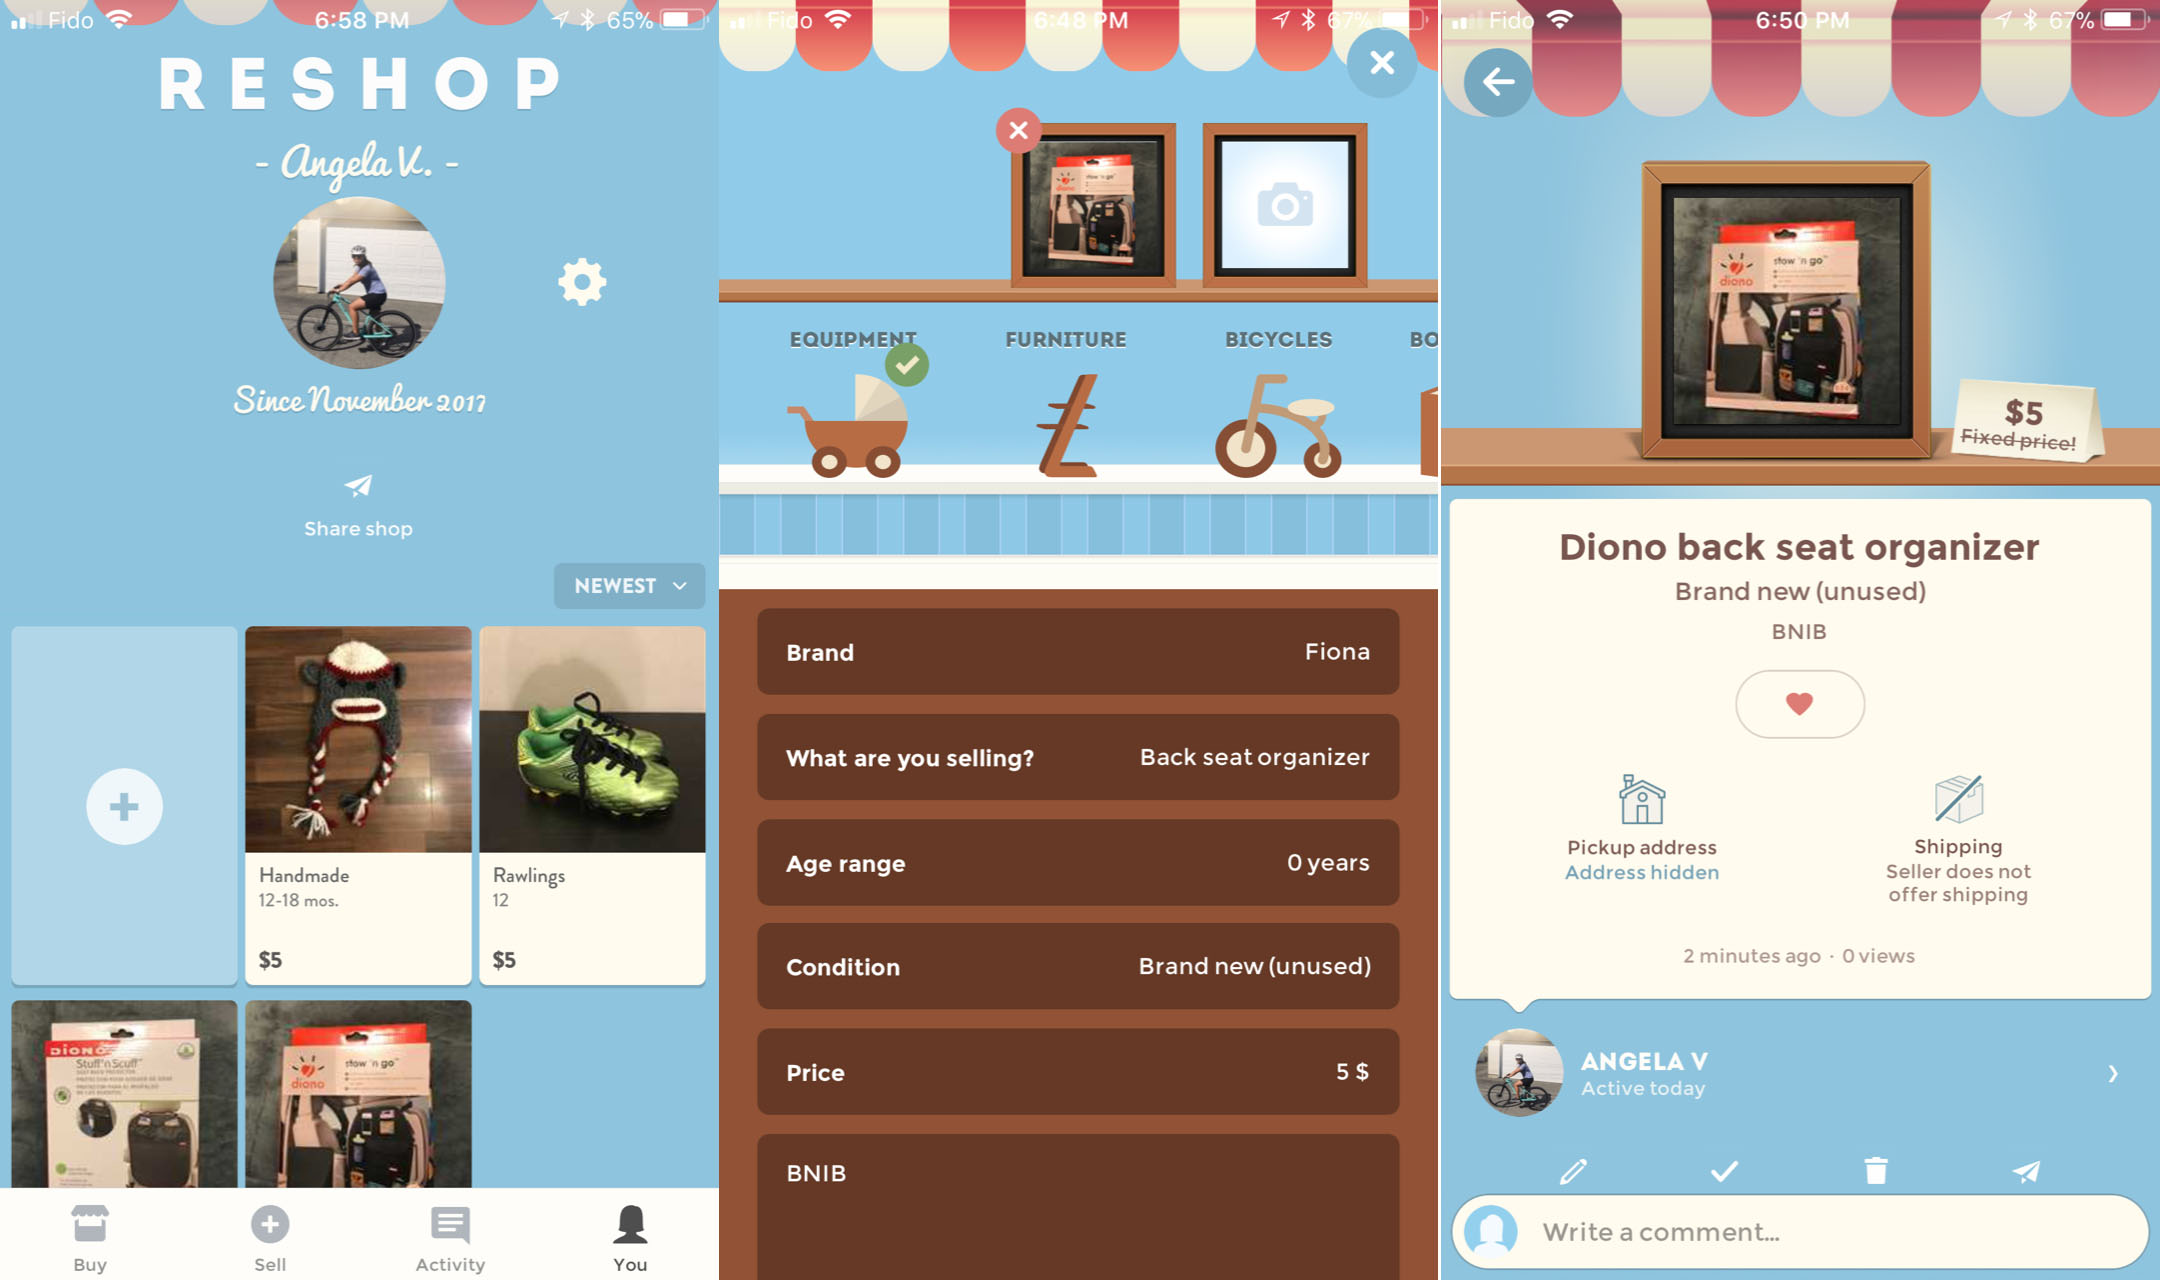 Easily sell your pre-loved kid stuff with Reshopper App